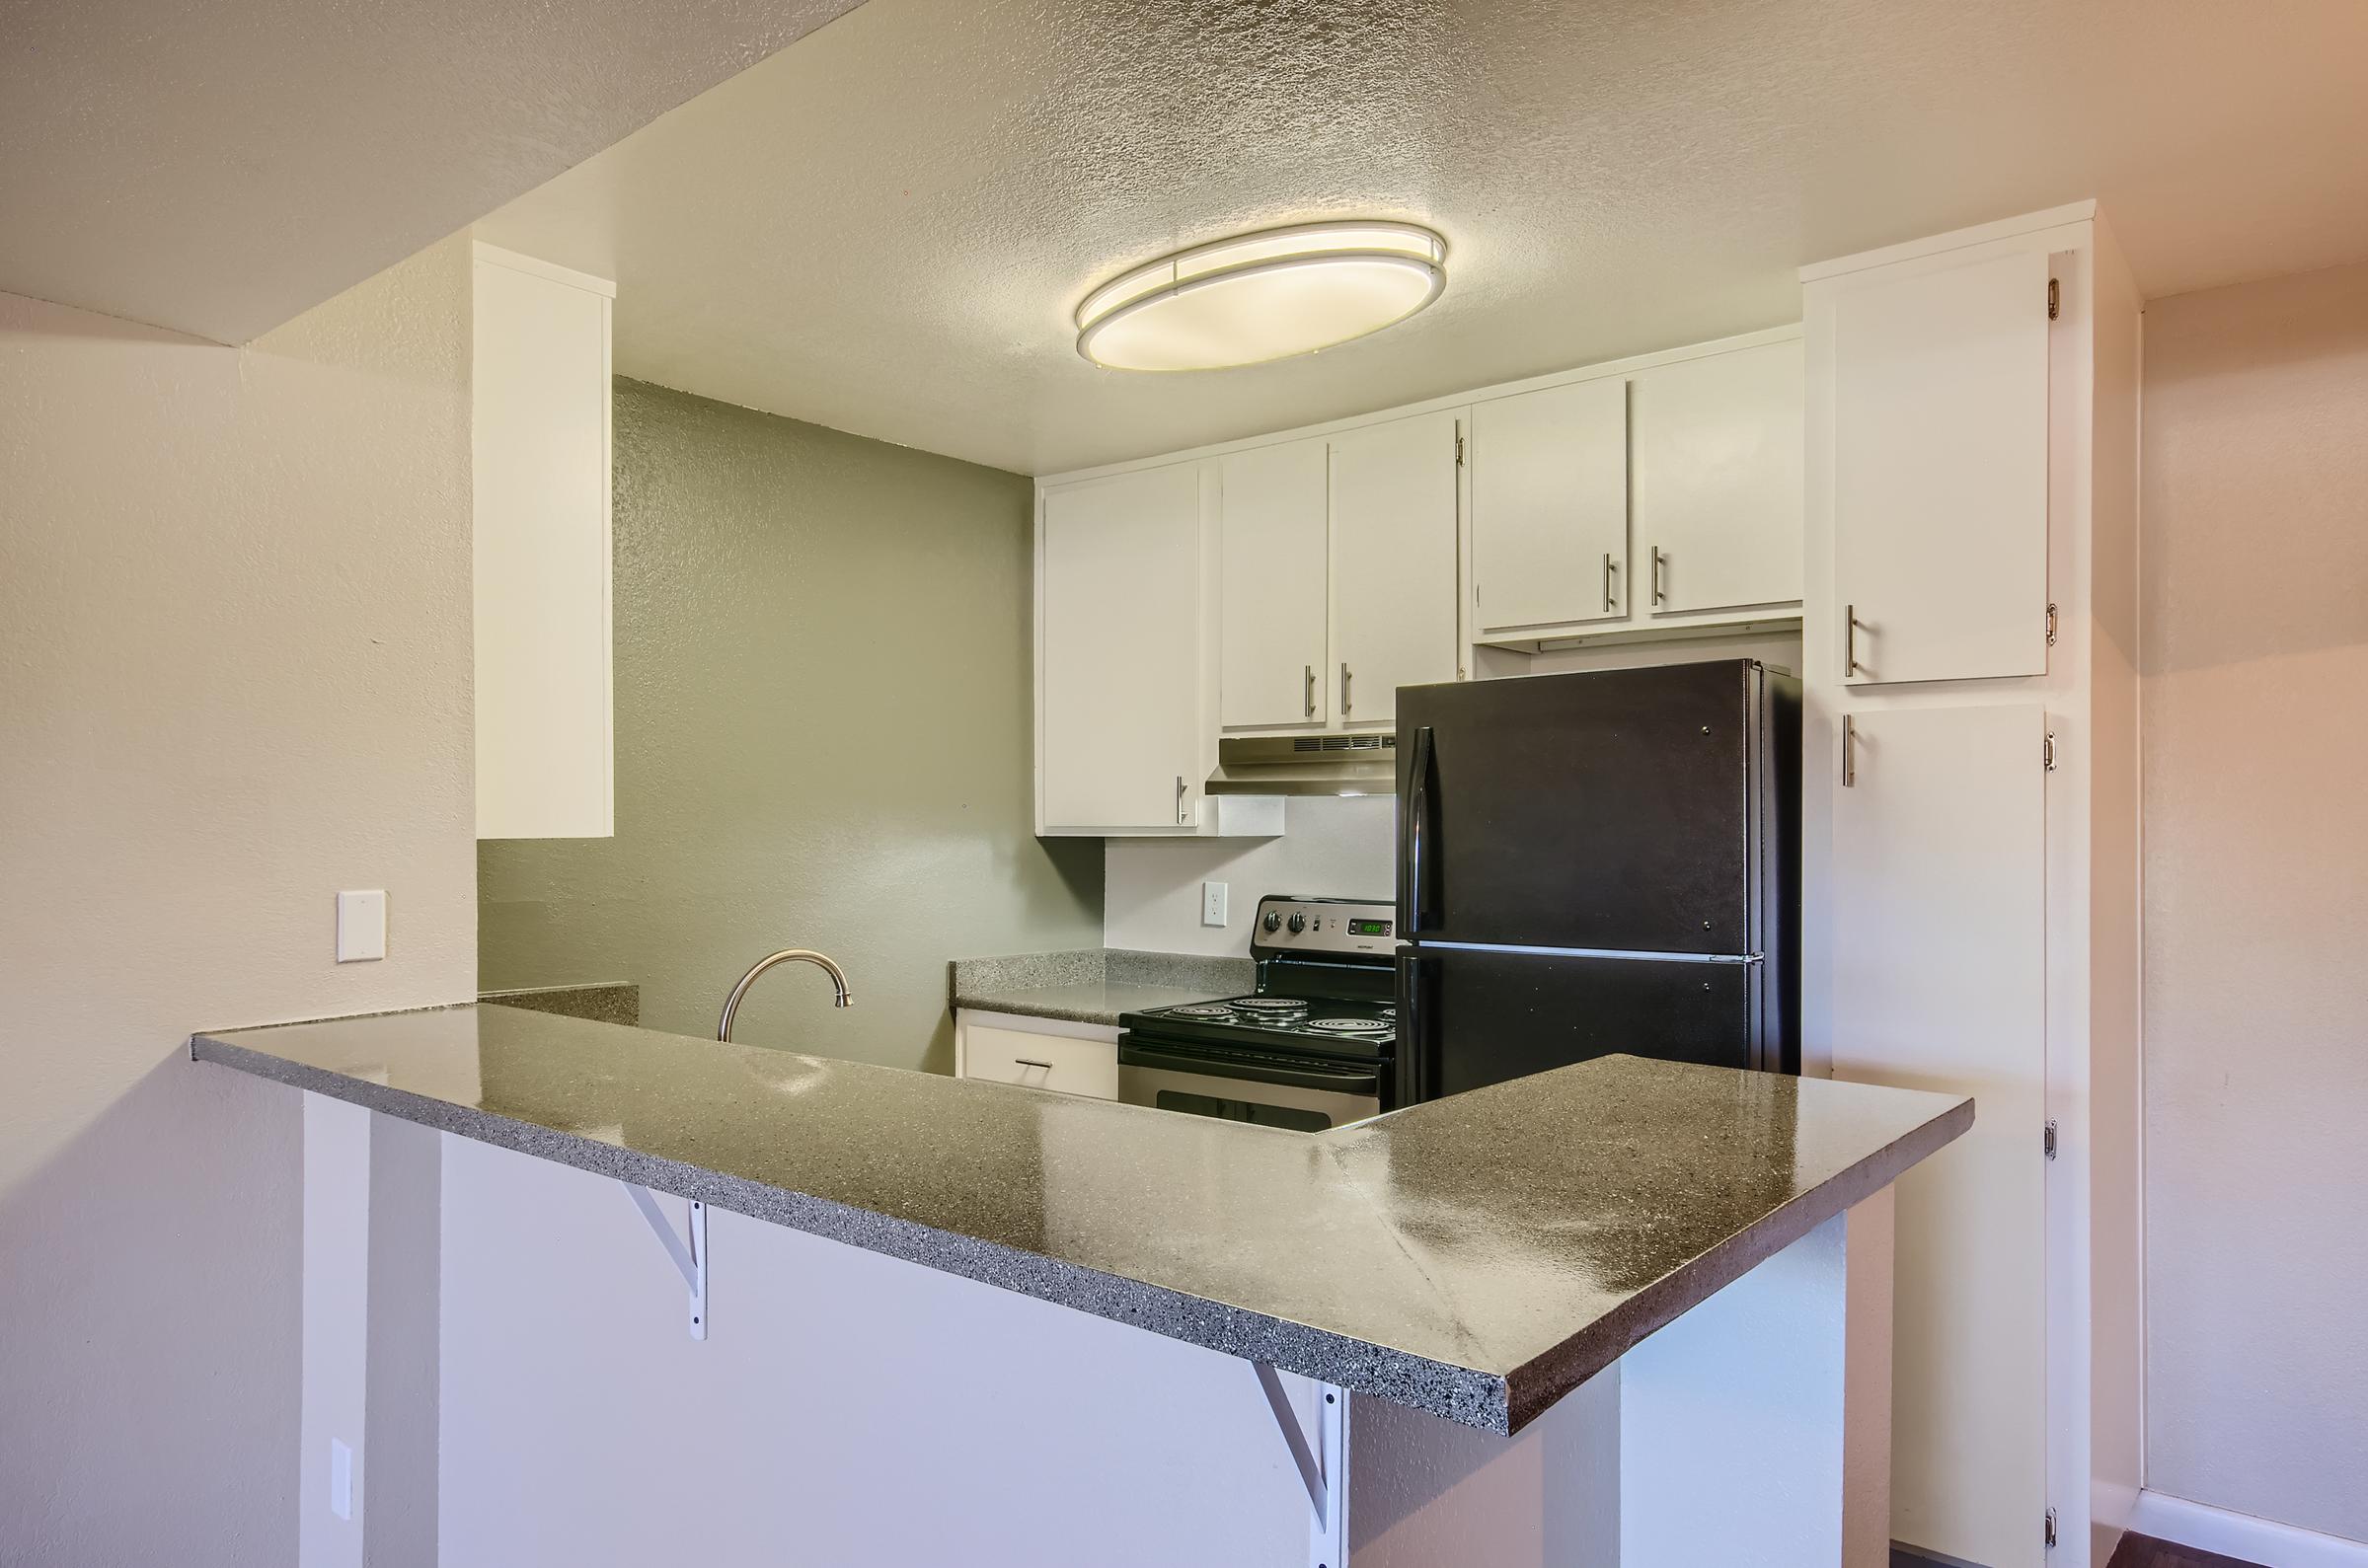 An apartment kitchen with white cabinets and black appliances at Rise on McClintock.